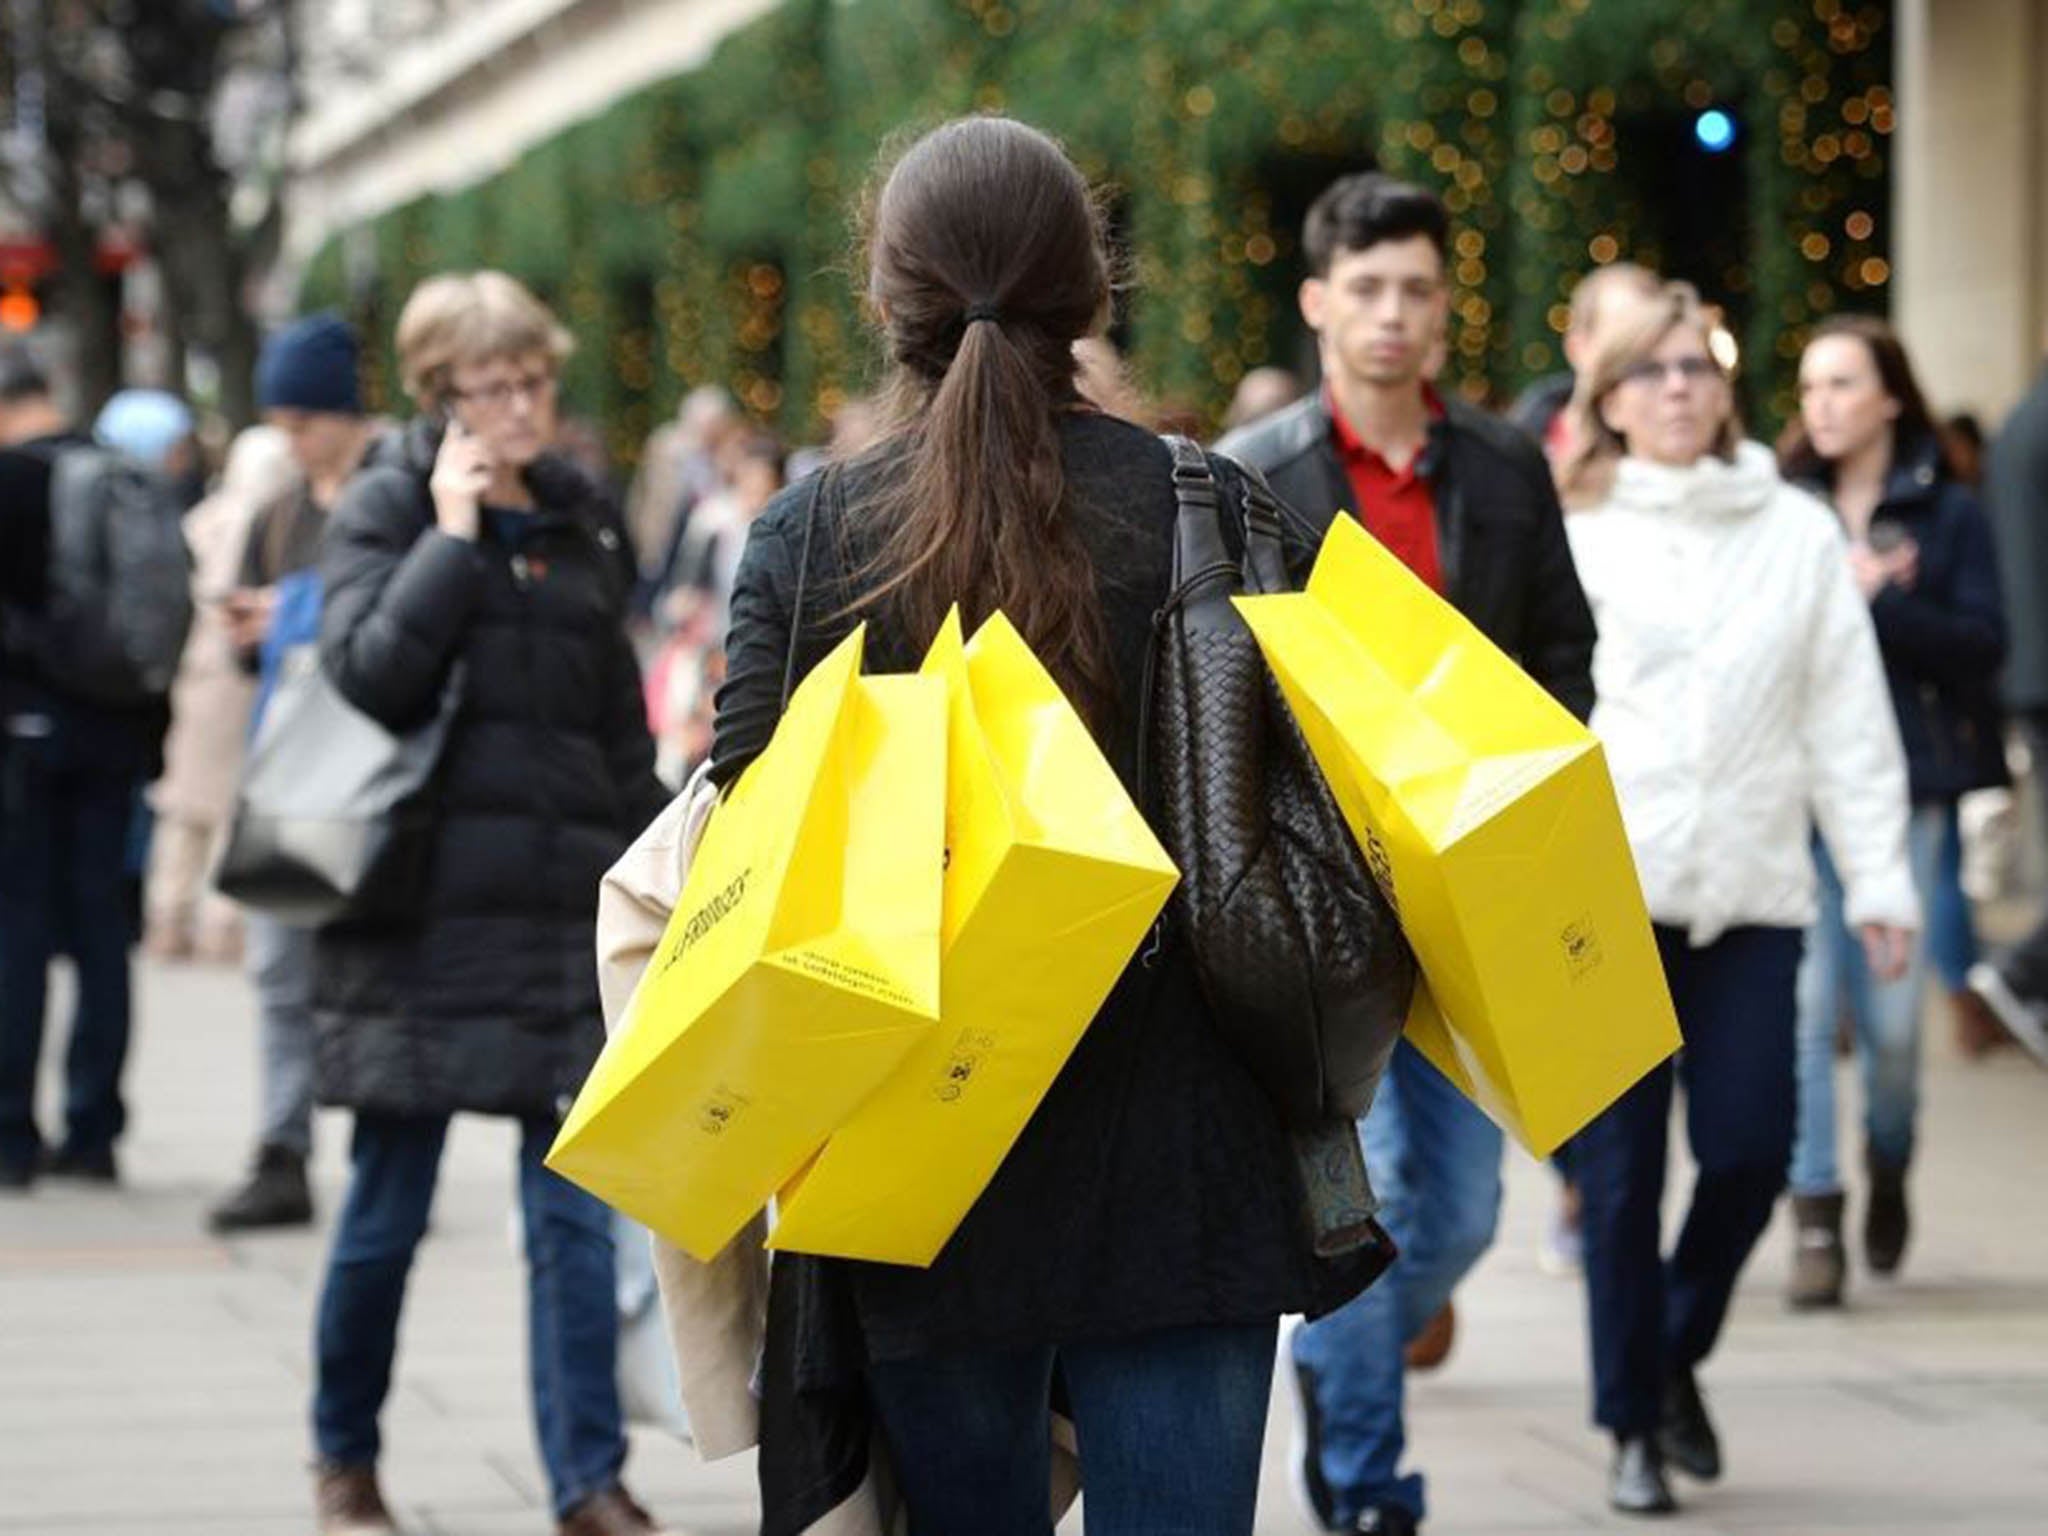 Retail spending was 1.9 per cent higher than a year earlier in July